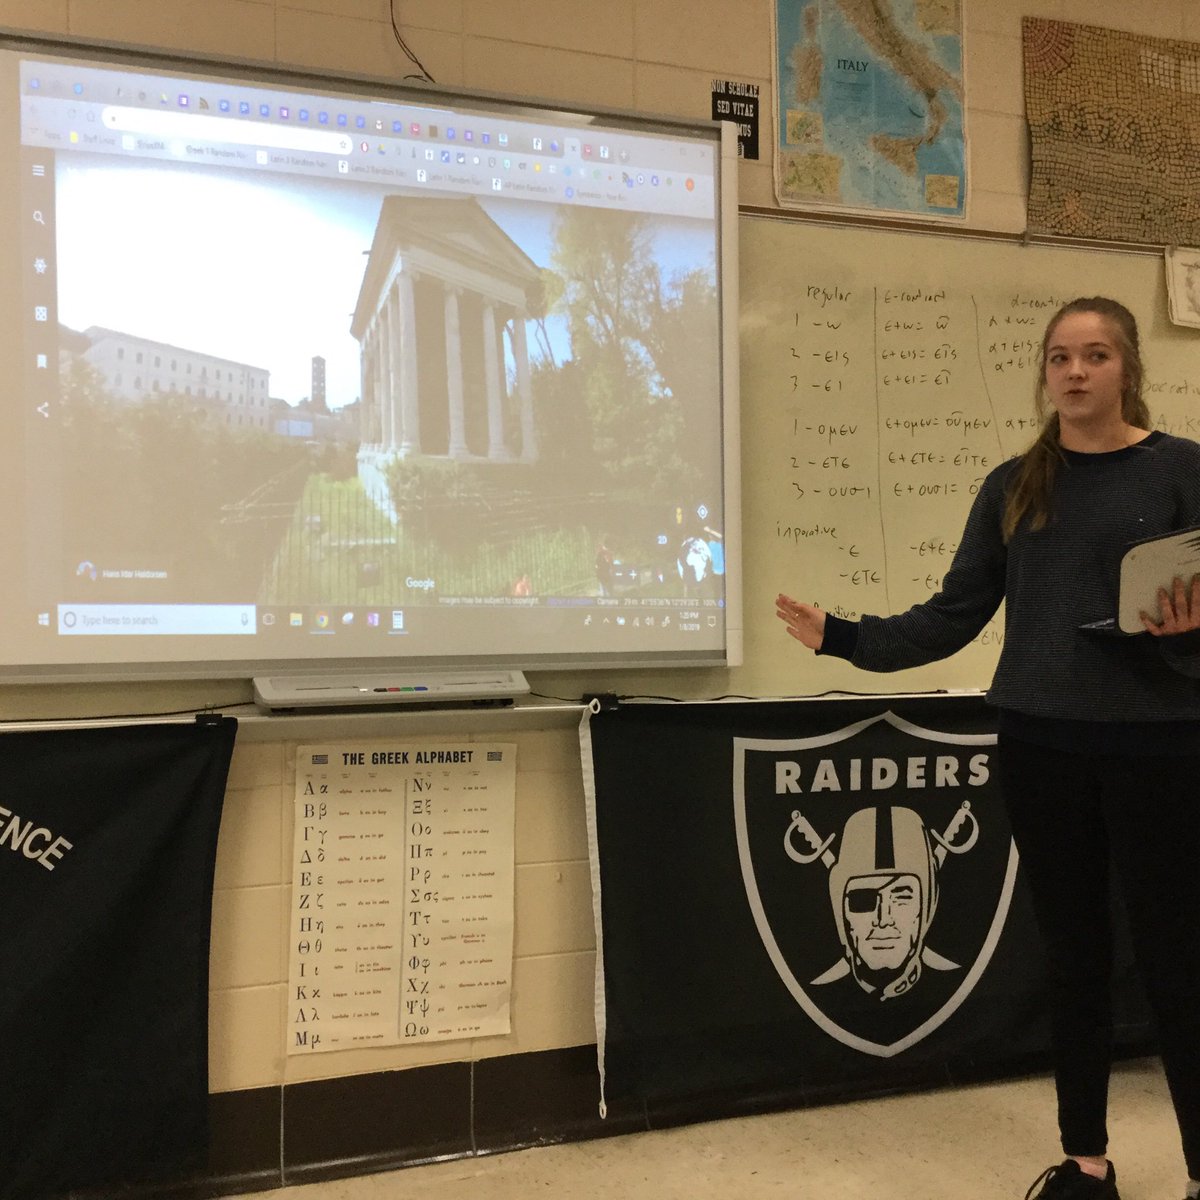 Latin II and III students presenting their Google Earth Rome Projects on new smartboard purchased by the FHS Technology Committee #fcslearn #yoursystemourcommunityoneflorence #fhsfalconslatin2 #fhsfalconslatin3